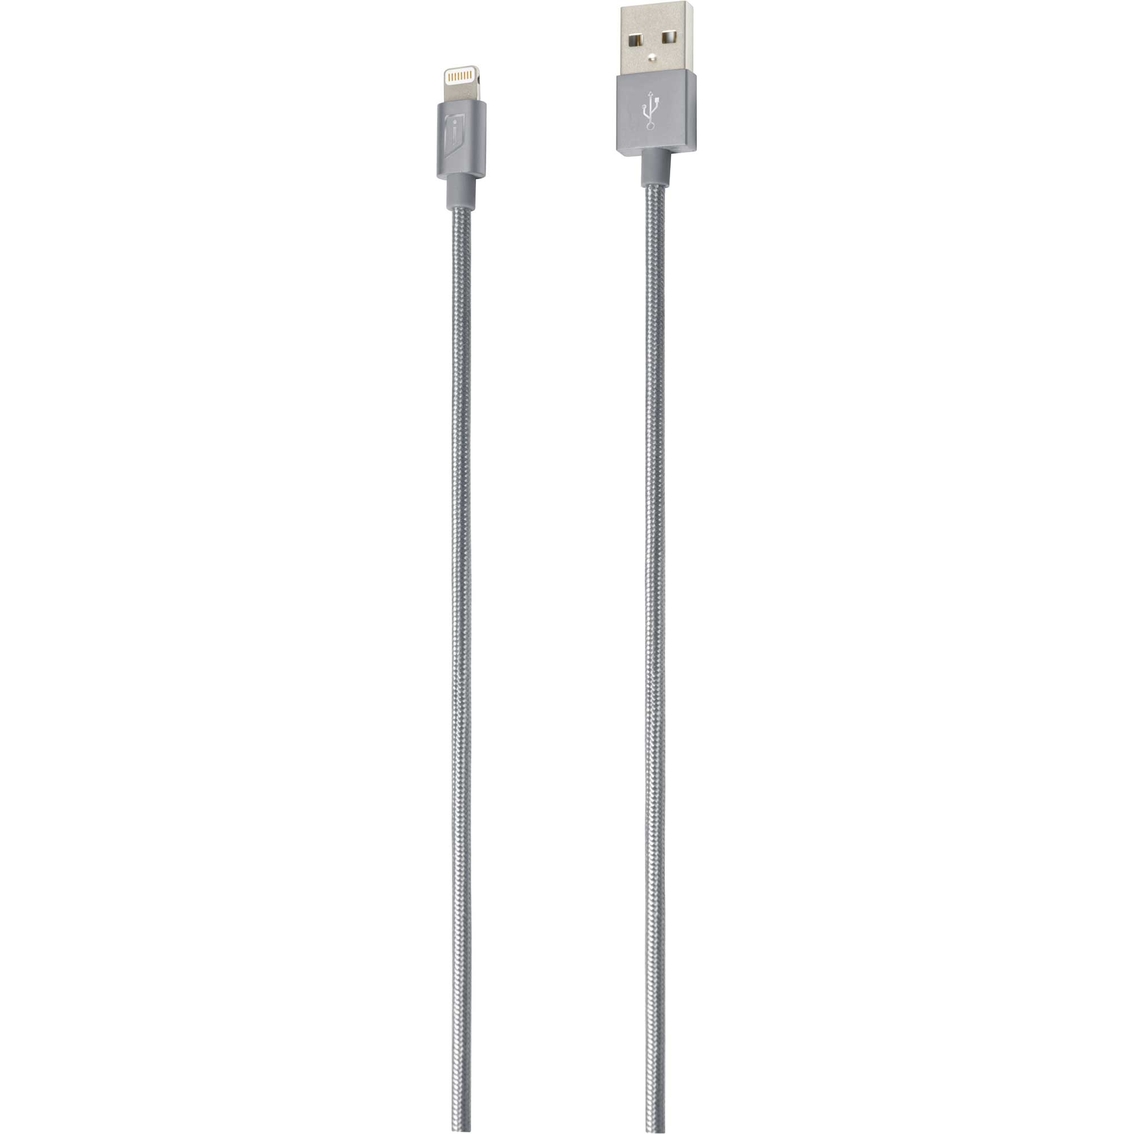 Targus iStore Lightning Charge 4 ft. Braided Cable - Image 2 of 2